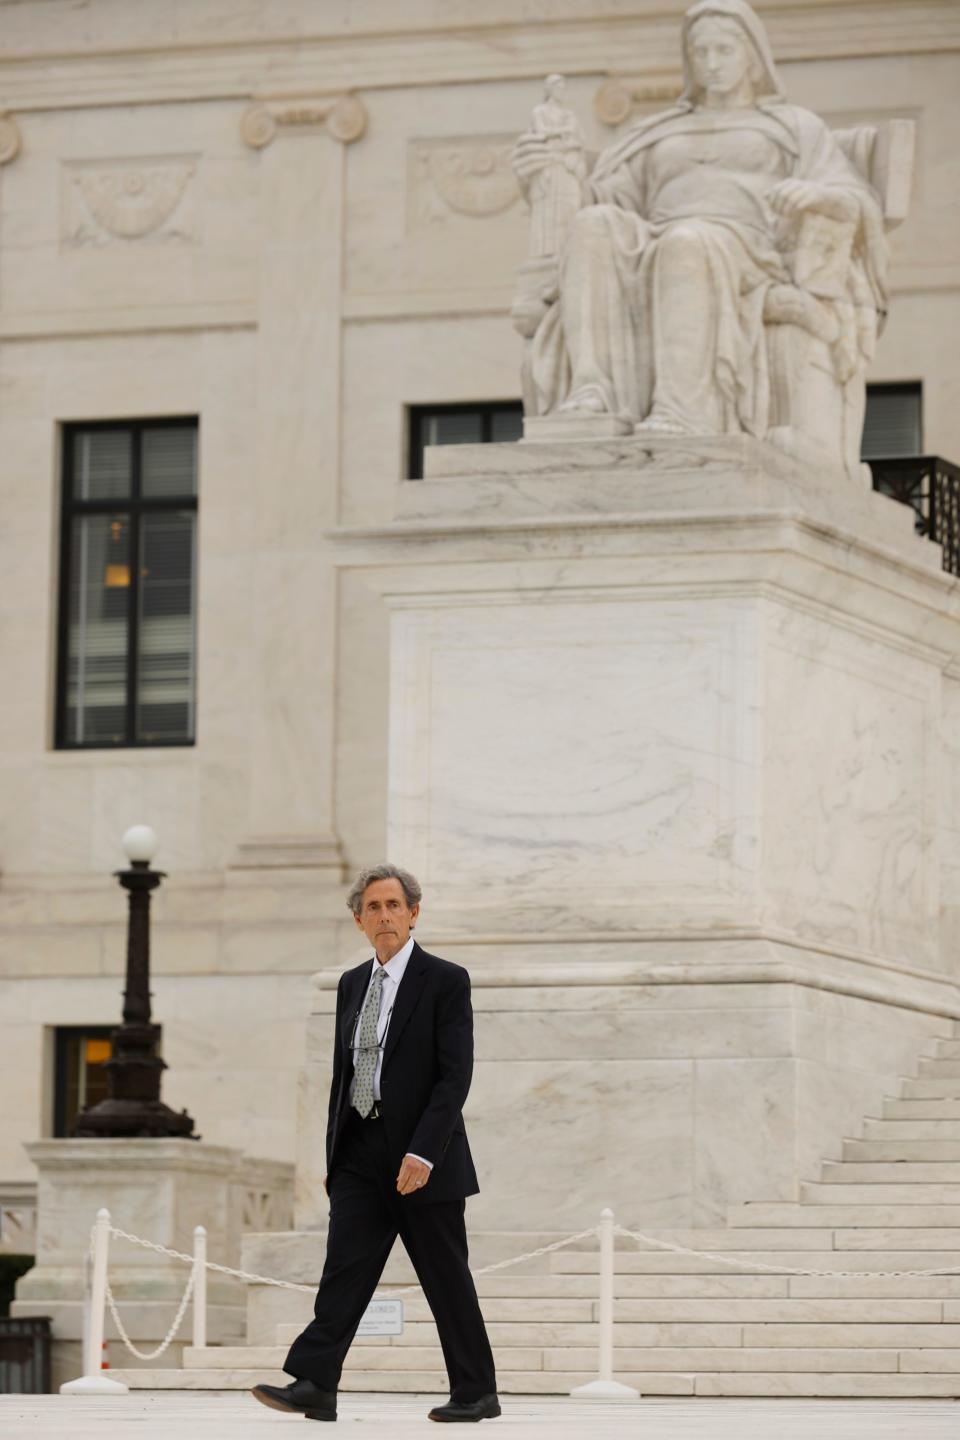 Edward Blum, a long-time opponent of affirmative action in higher education and founder of Students for Fair Admissions, leaves the U.S. Supreme Court after oral arguments in Students for Fair Admissions v. President and Fellows of Harvard College and Students for Fair Admissions v. University of North Carolina last year.